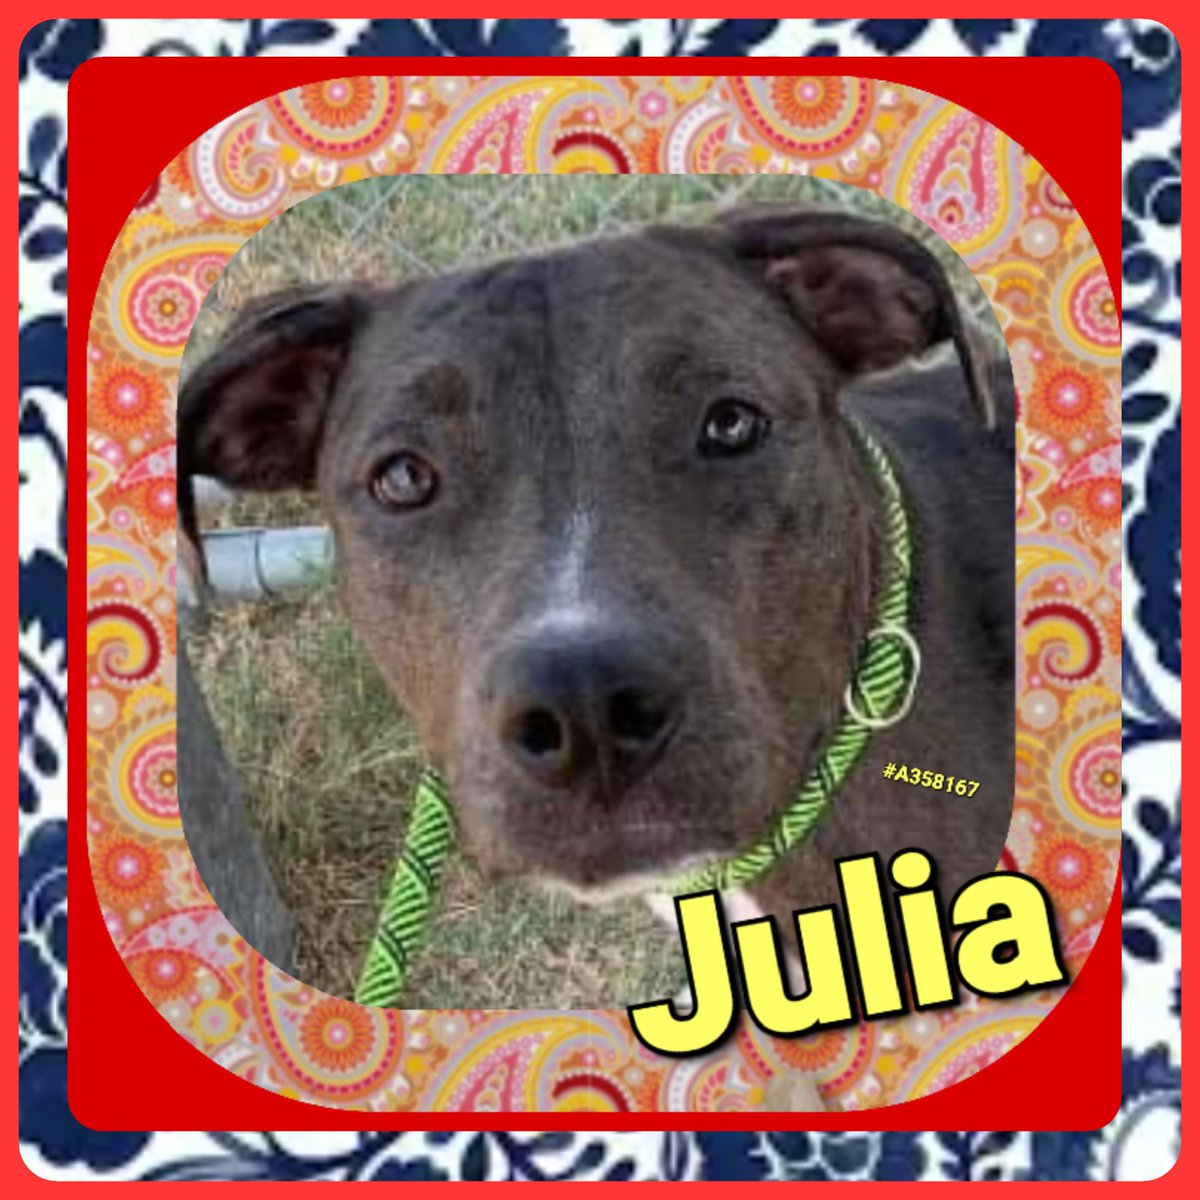 🚨🐕⏰️ JULIA #A358167 🚨⏰ 🐕 At only 1yo this APBT is doomed to DIE on 8/31🔥 Why? Because she is SCARED spitless! Look at the PAIN in those eyes 😢🖤 We can SAVE her! Please pledge for RESCUE🙏 Contact CORPUS CHRISTI ANIMAL CARE 📧 ccacsrescues@cctexas.com 📞 361-826-4630